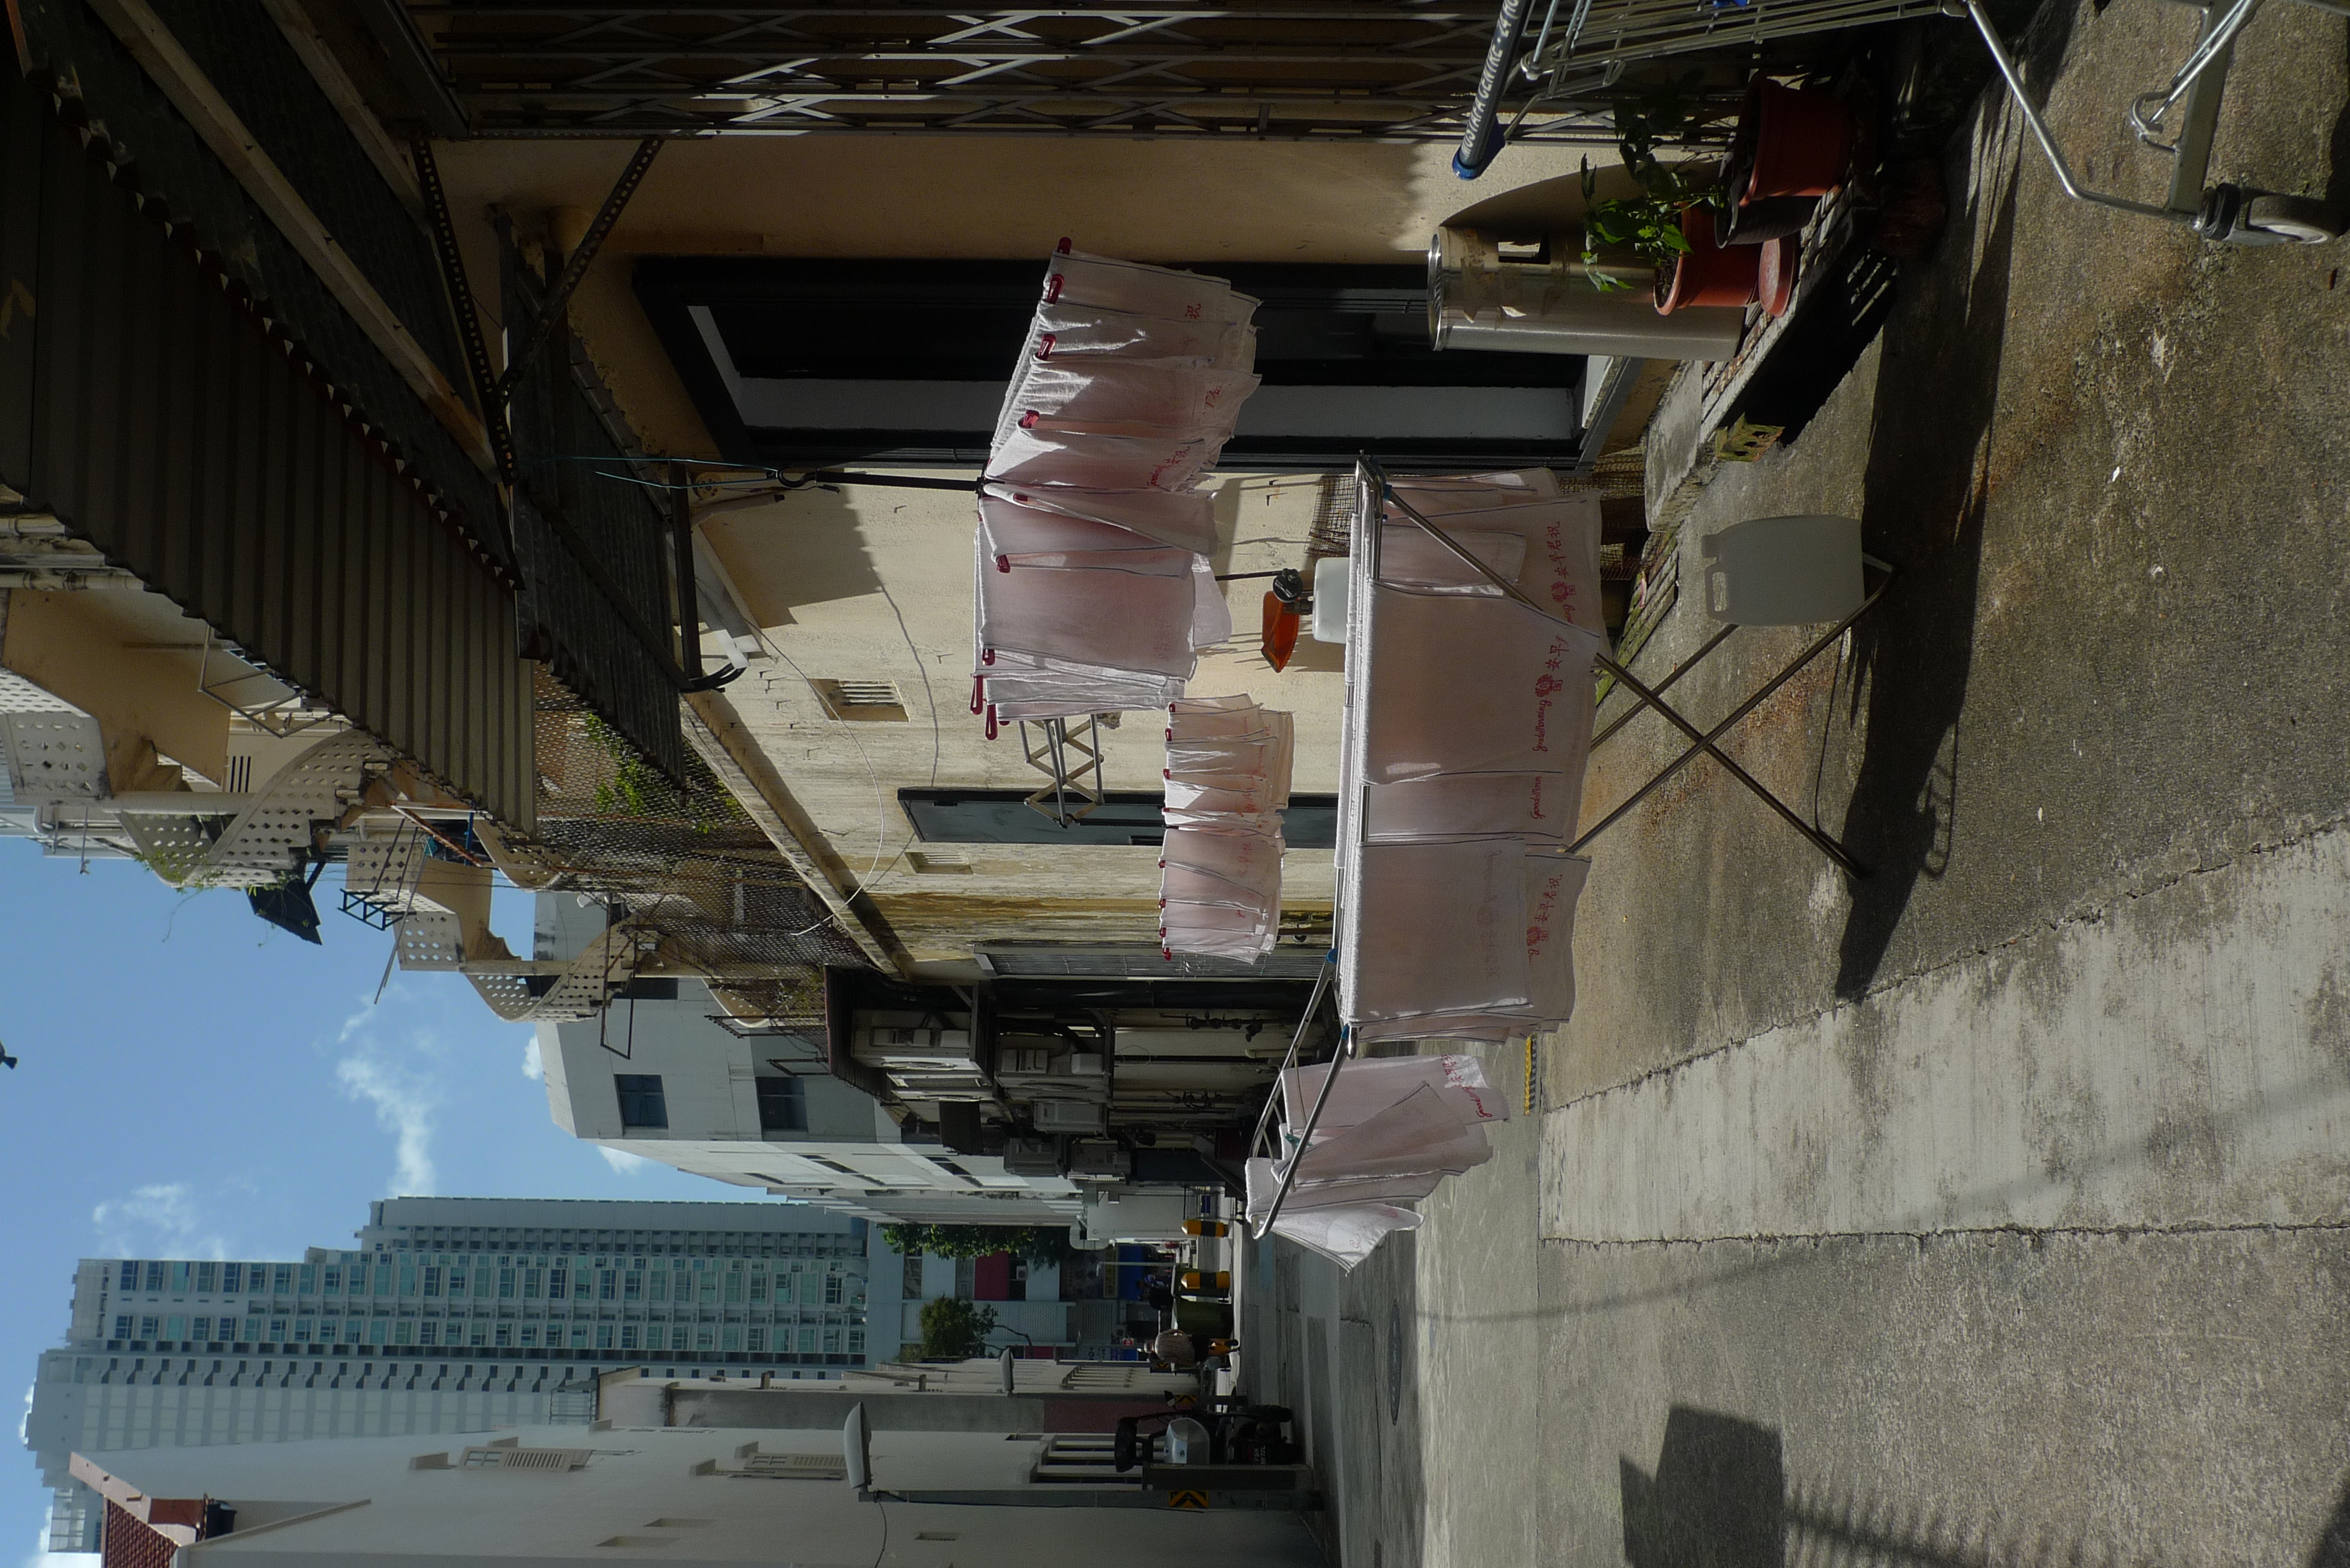 A set of clothes hangers placed alongside each other, each holding a number of Good Morning brand towels--white towels with Chinese print in red and script that says Good Morning, in a backstreet in Jalan Besar district, Singapore